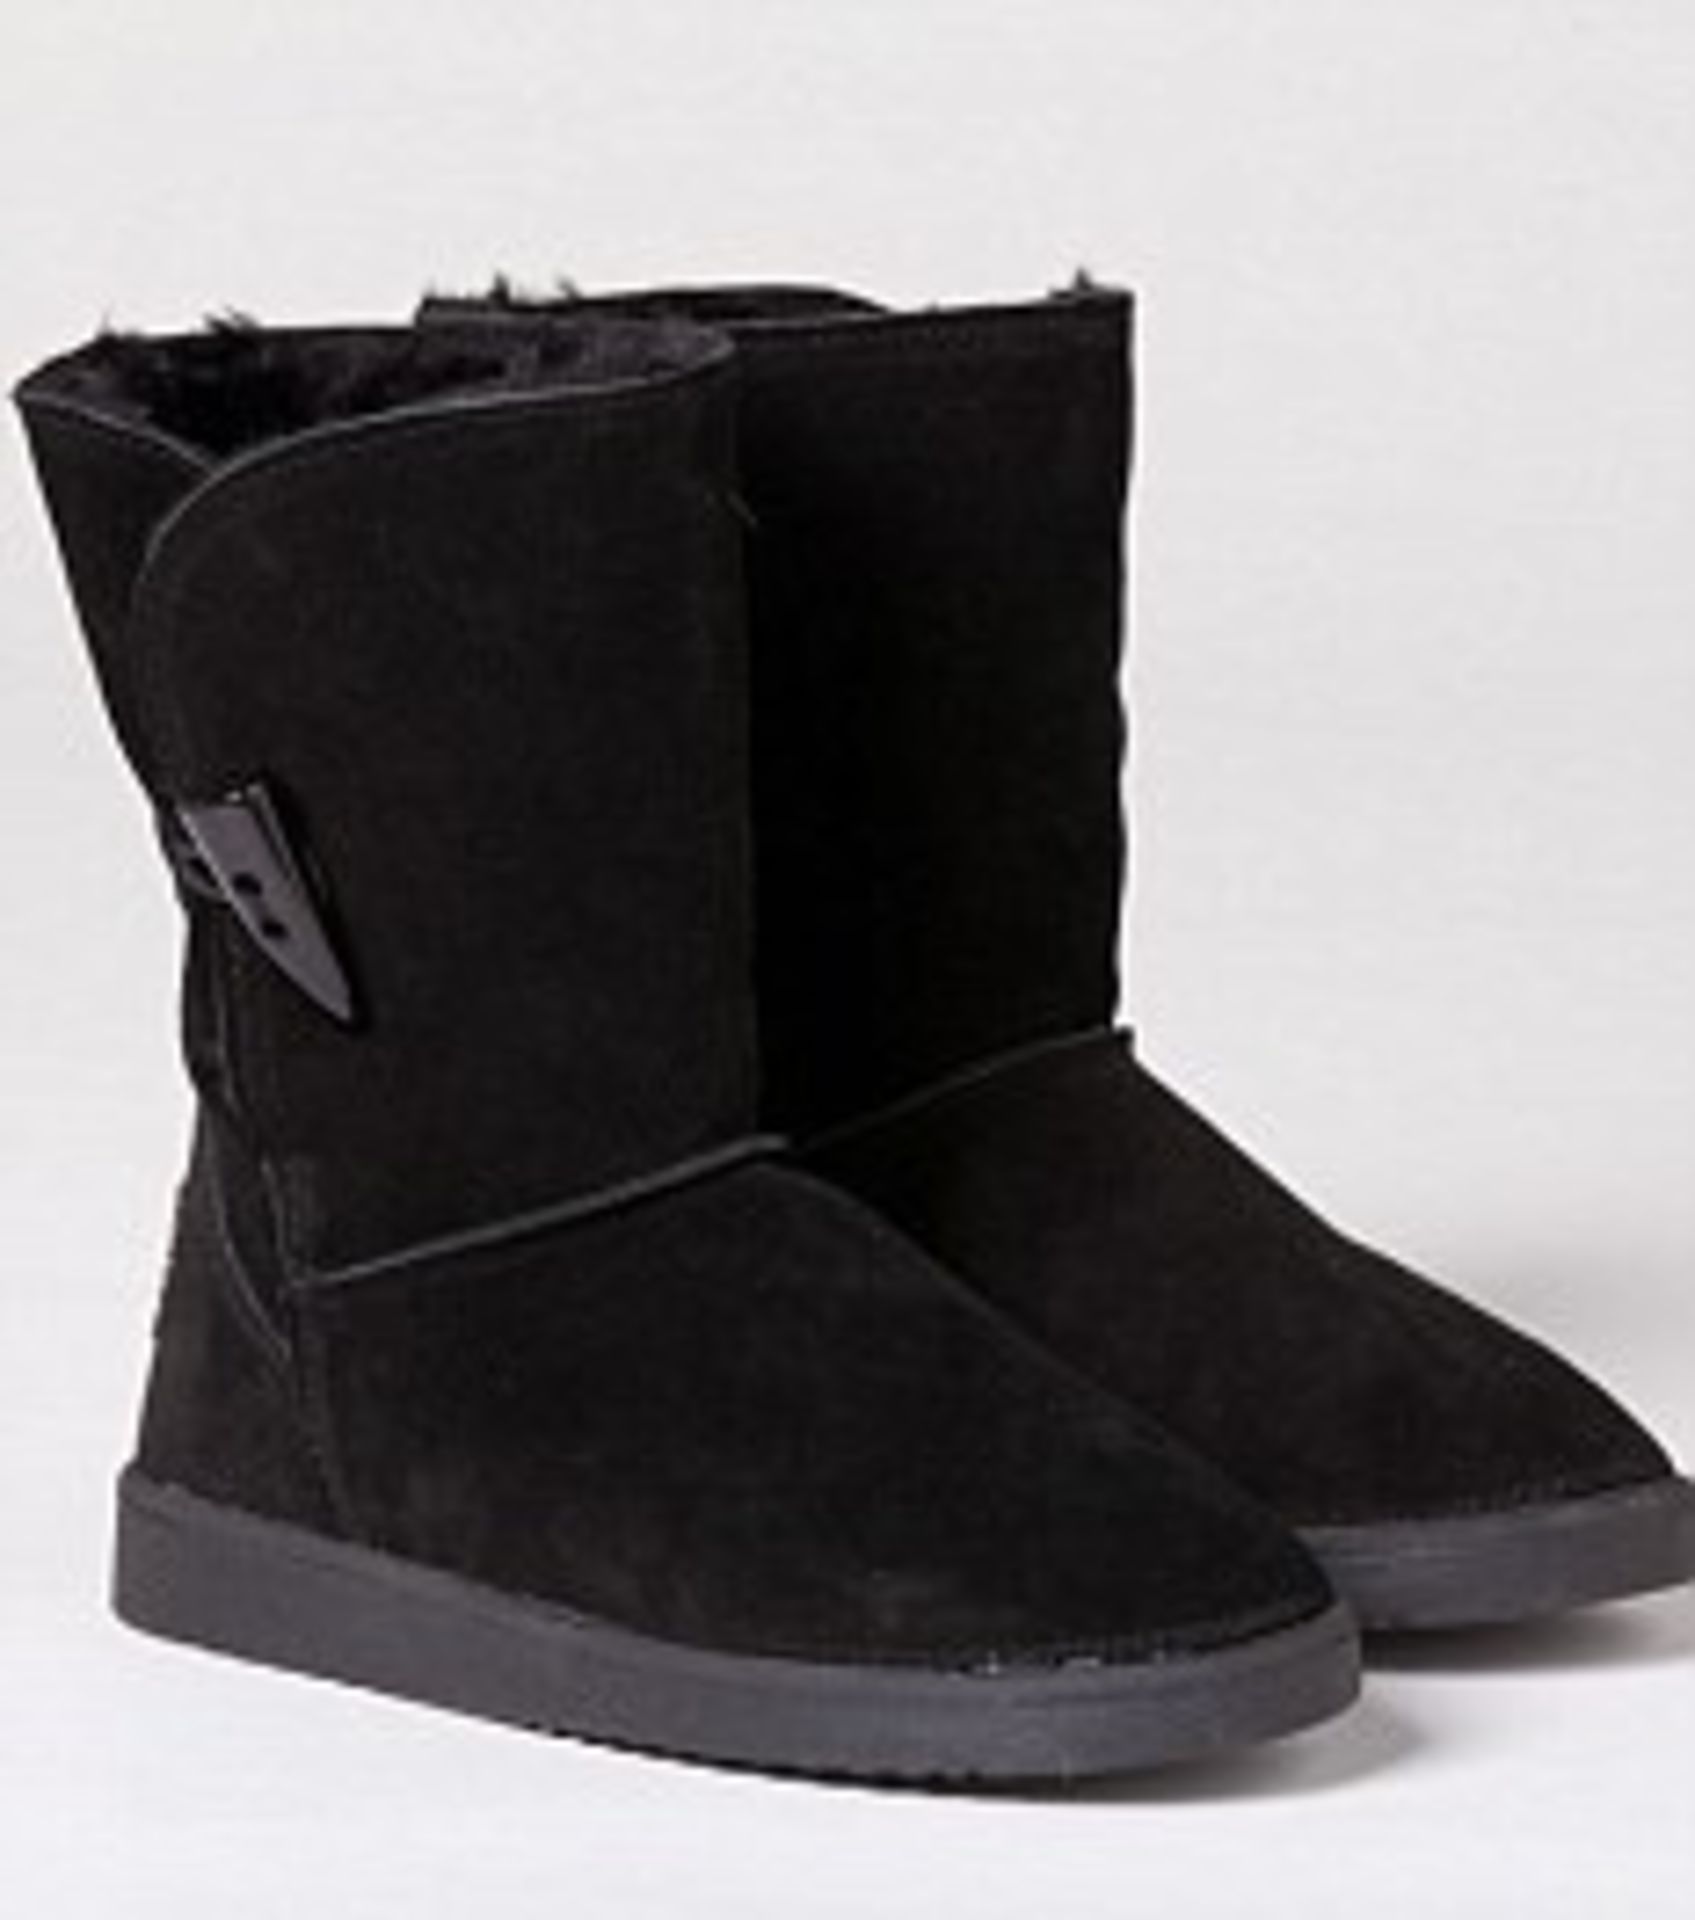 V Brand New Pair Of Ugg Style Boots - Black - Size 5 - Image Is Similar